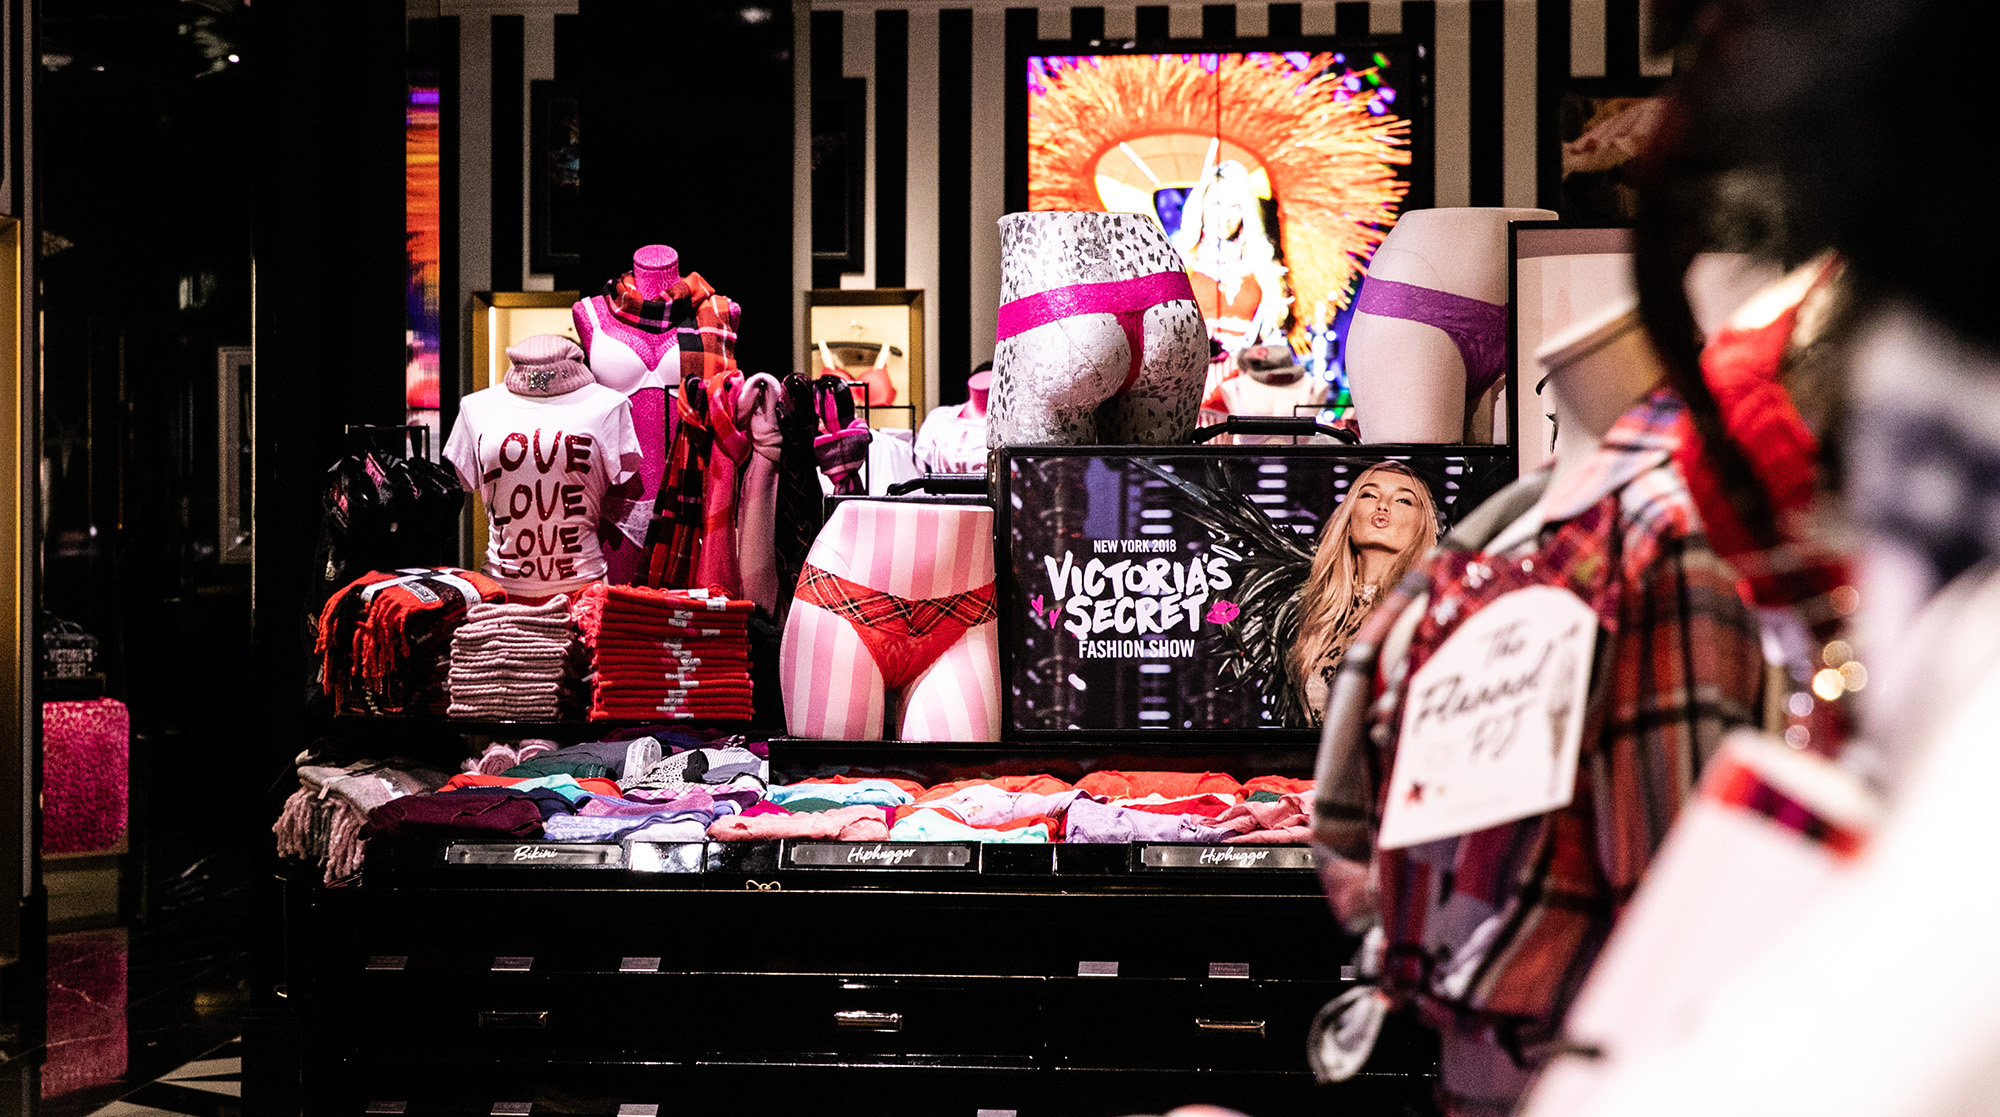 Victoria's Secret Plans To Sell Apparel and Lingerie on